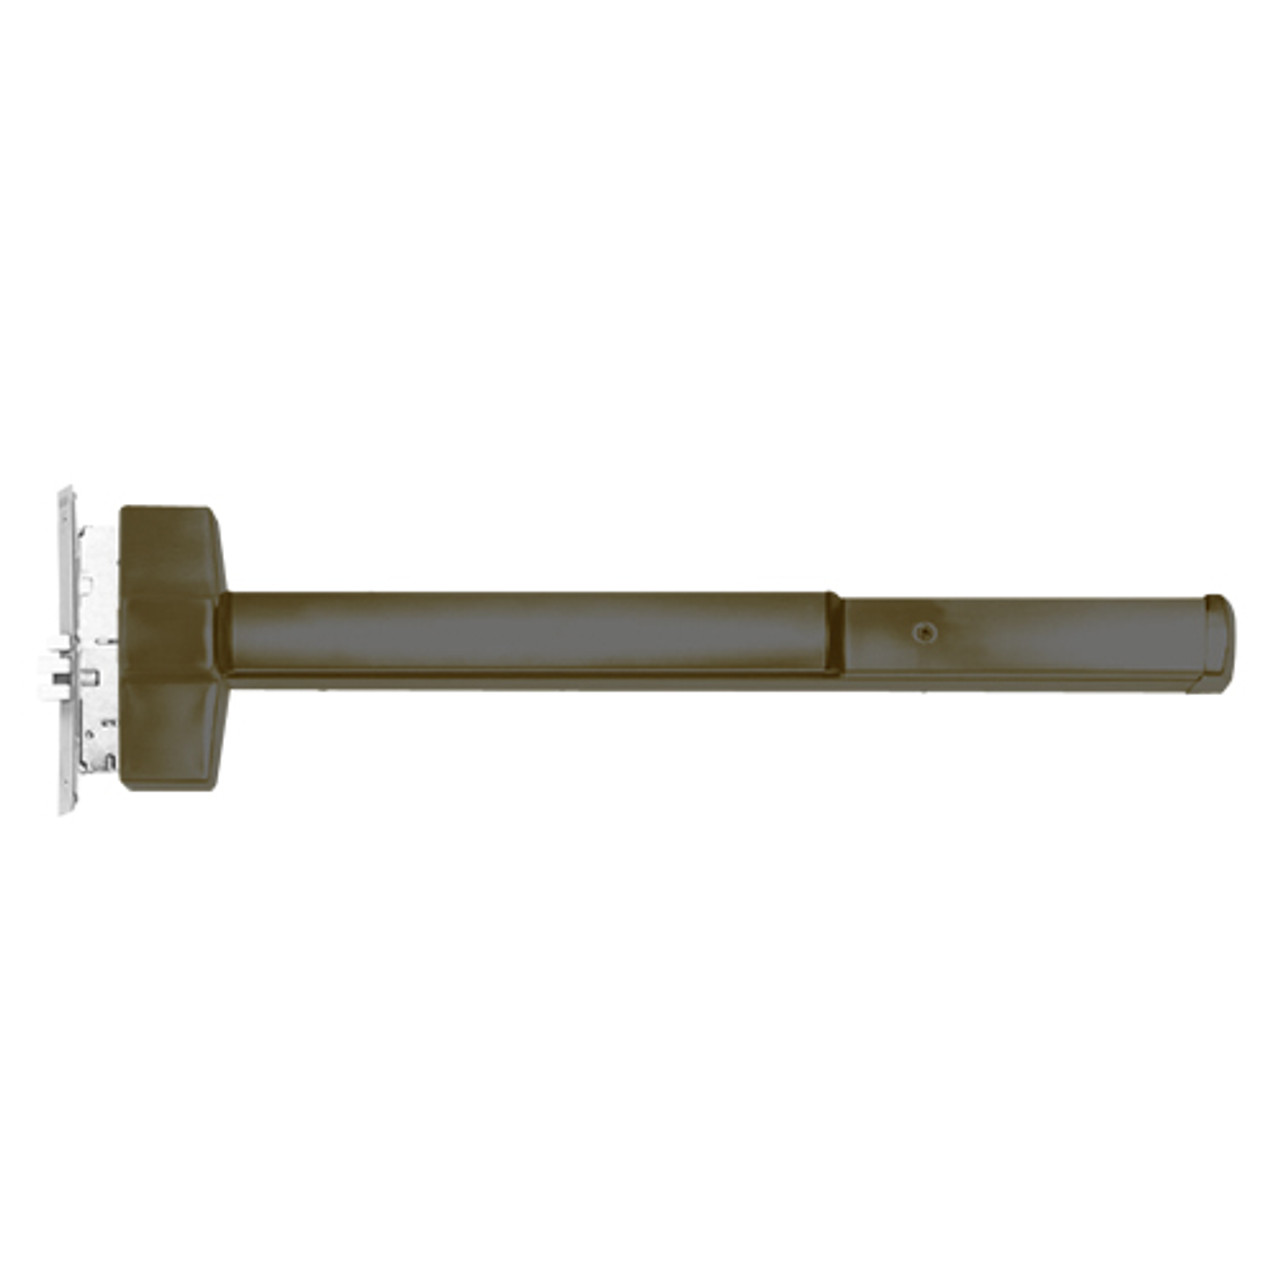 ED5657LD-613-LHR Corbin ED5600 Series Non Fire Rated Mortise Exit Device with Delayed Egress in Oil Rubbed Bronze Finish